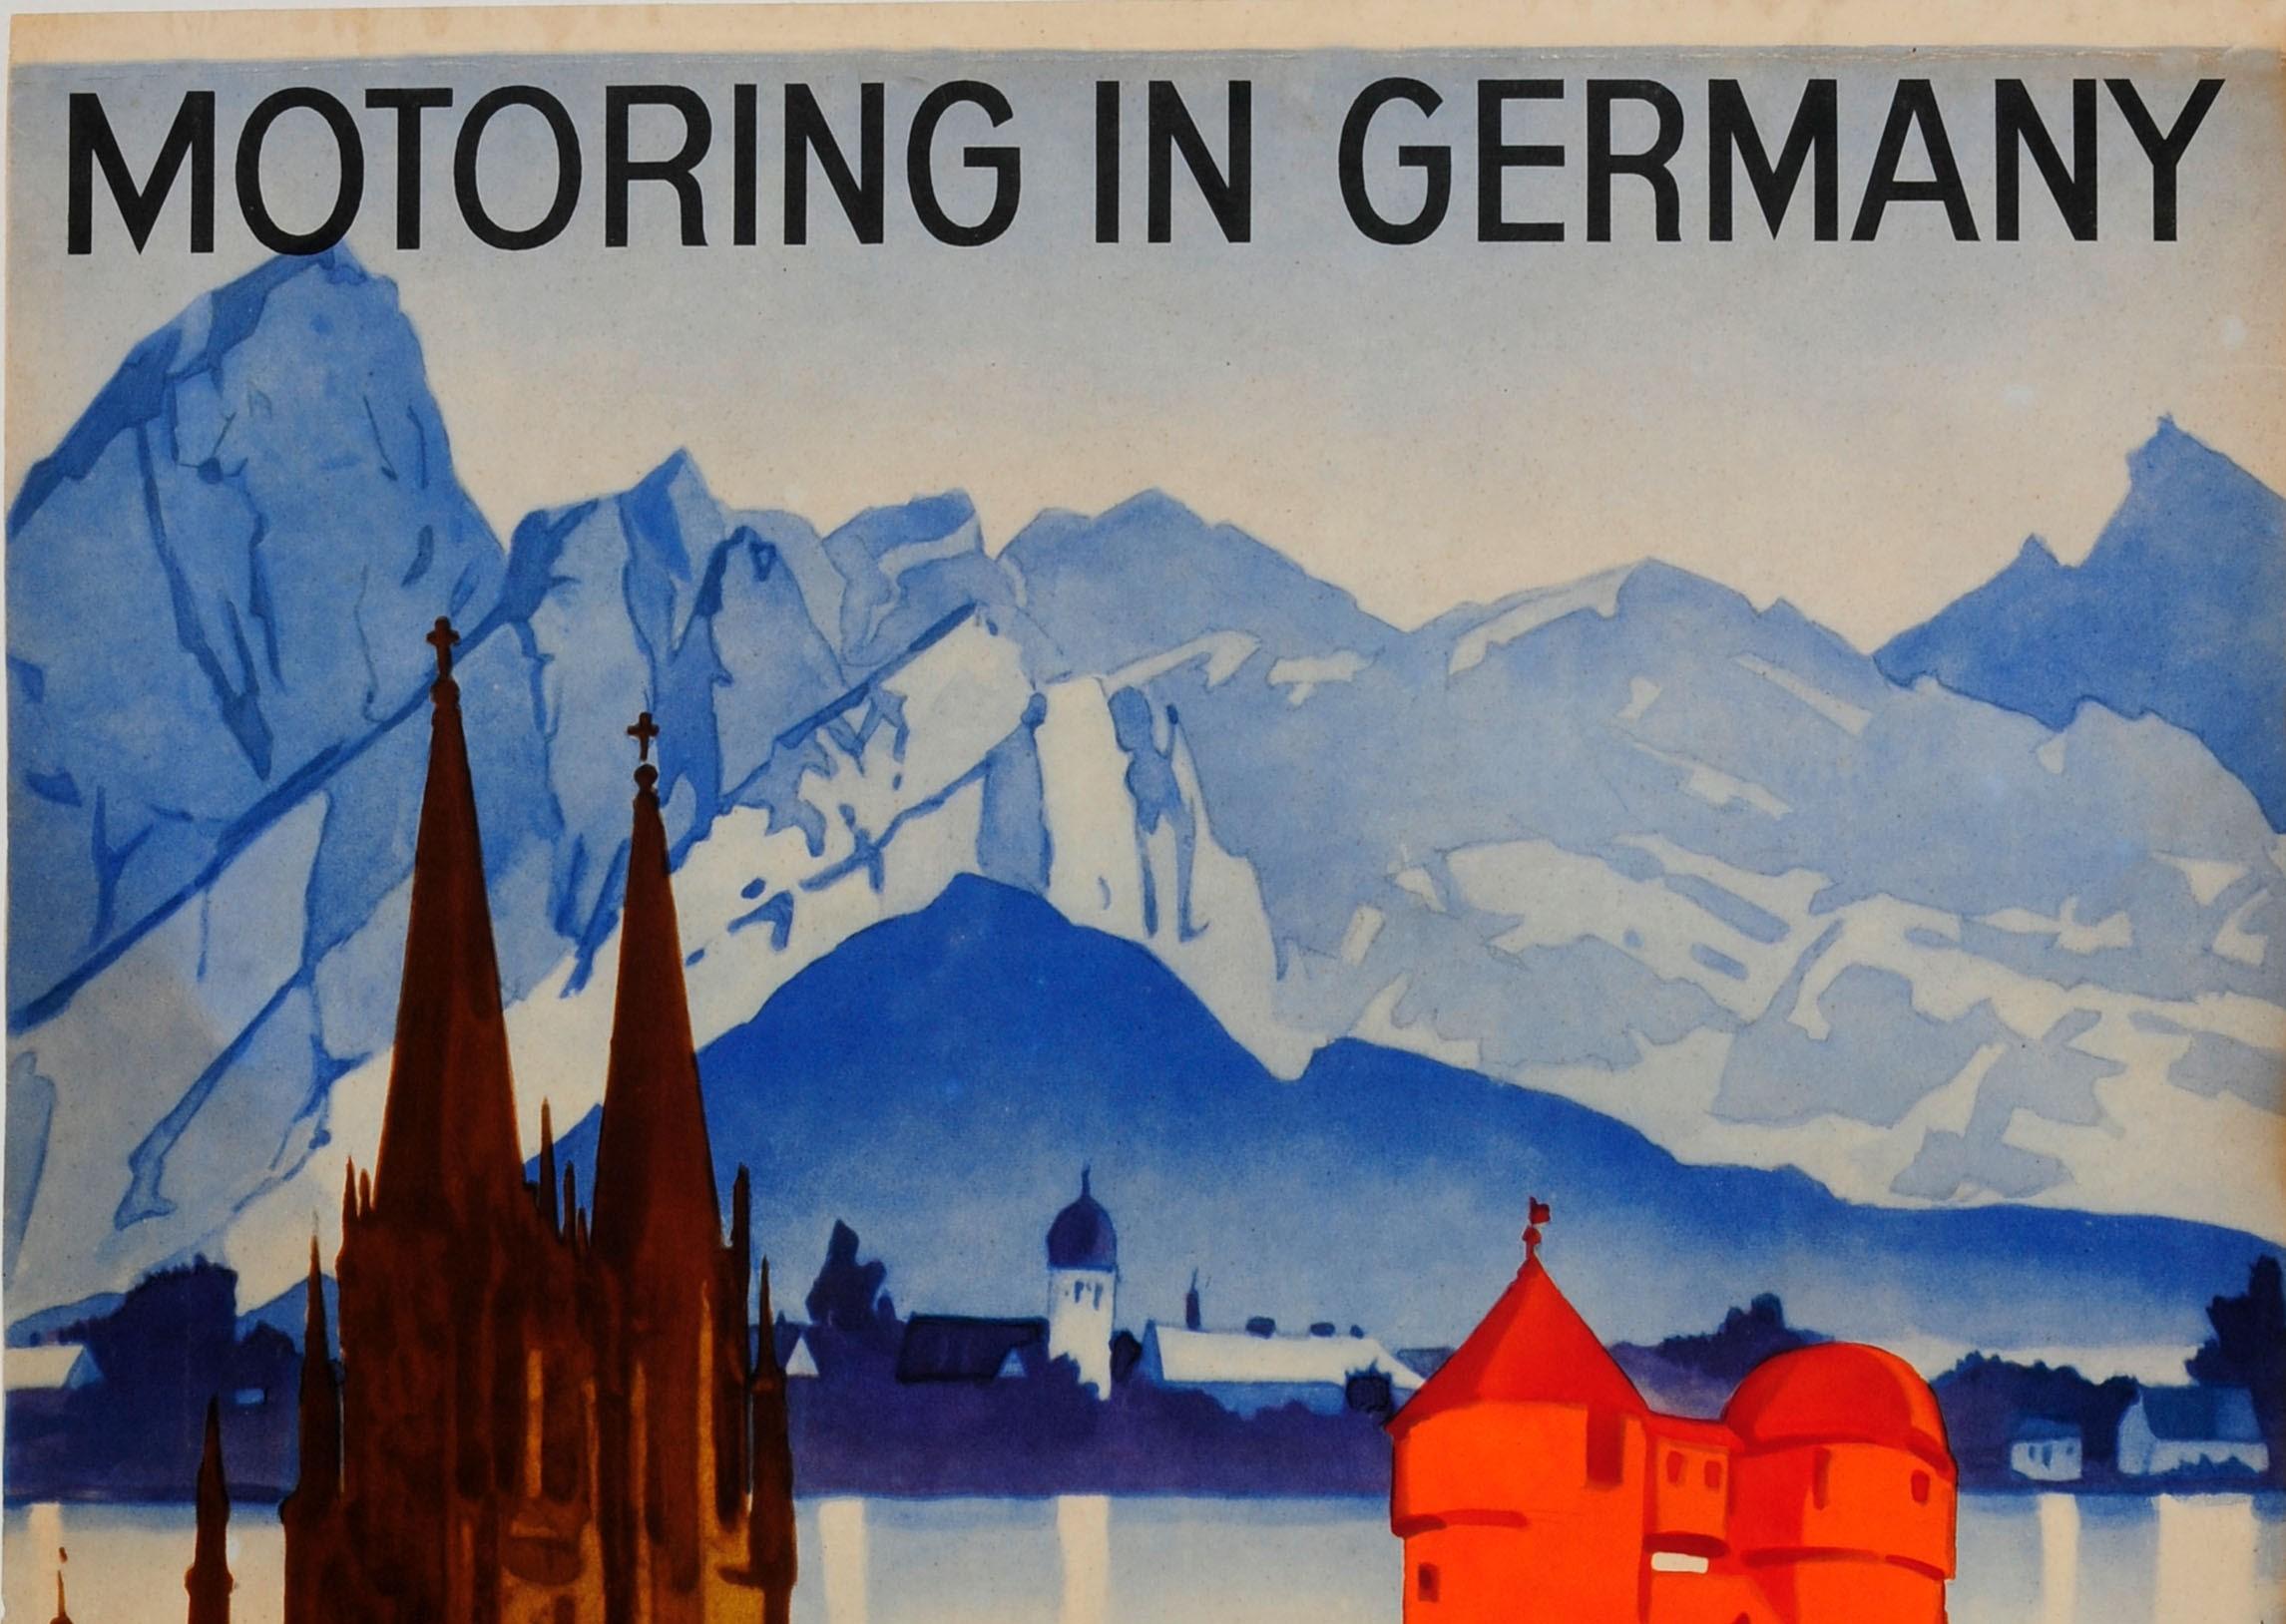 Original Vintage Travel Poster By Hohlwein Motoring In Germany Classic Car Tours - Print by Ludwig Hohlwein